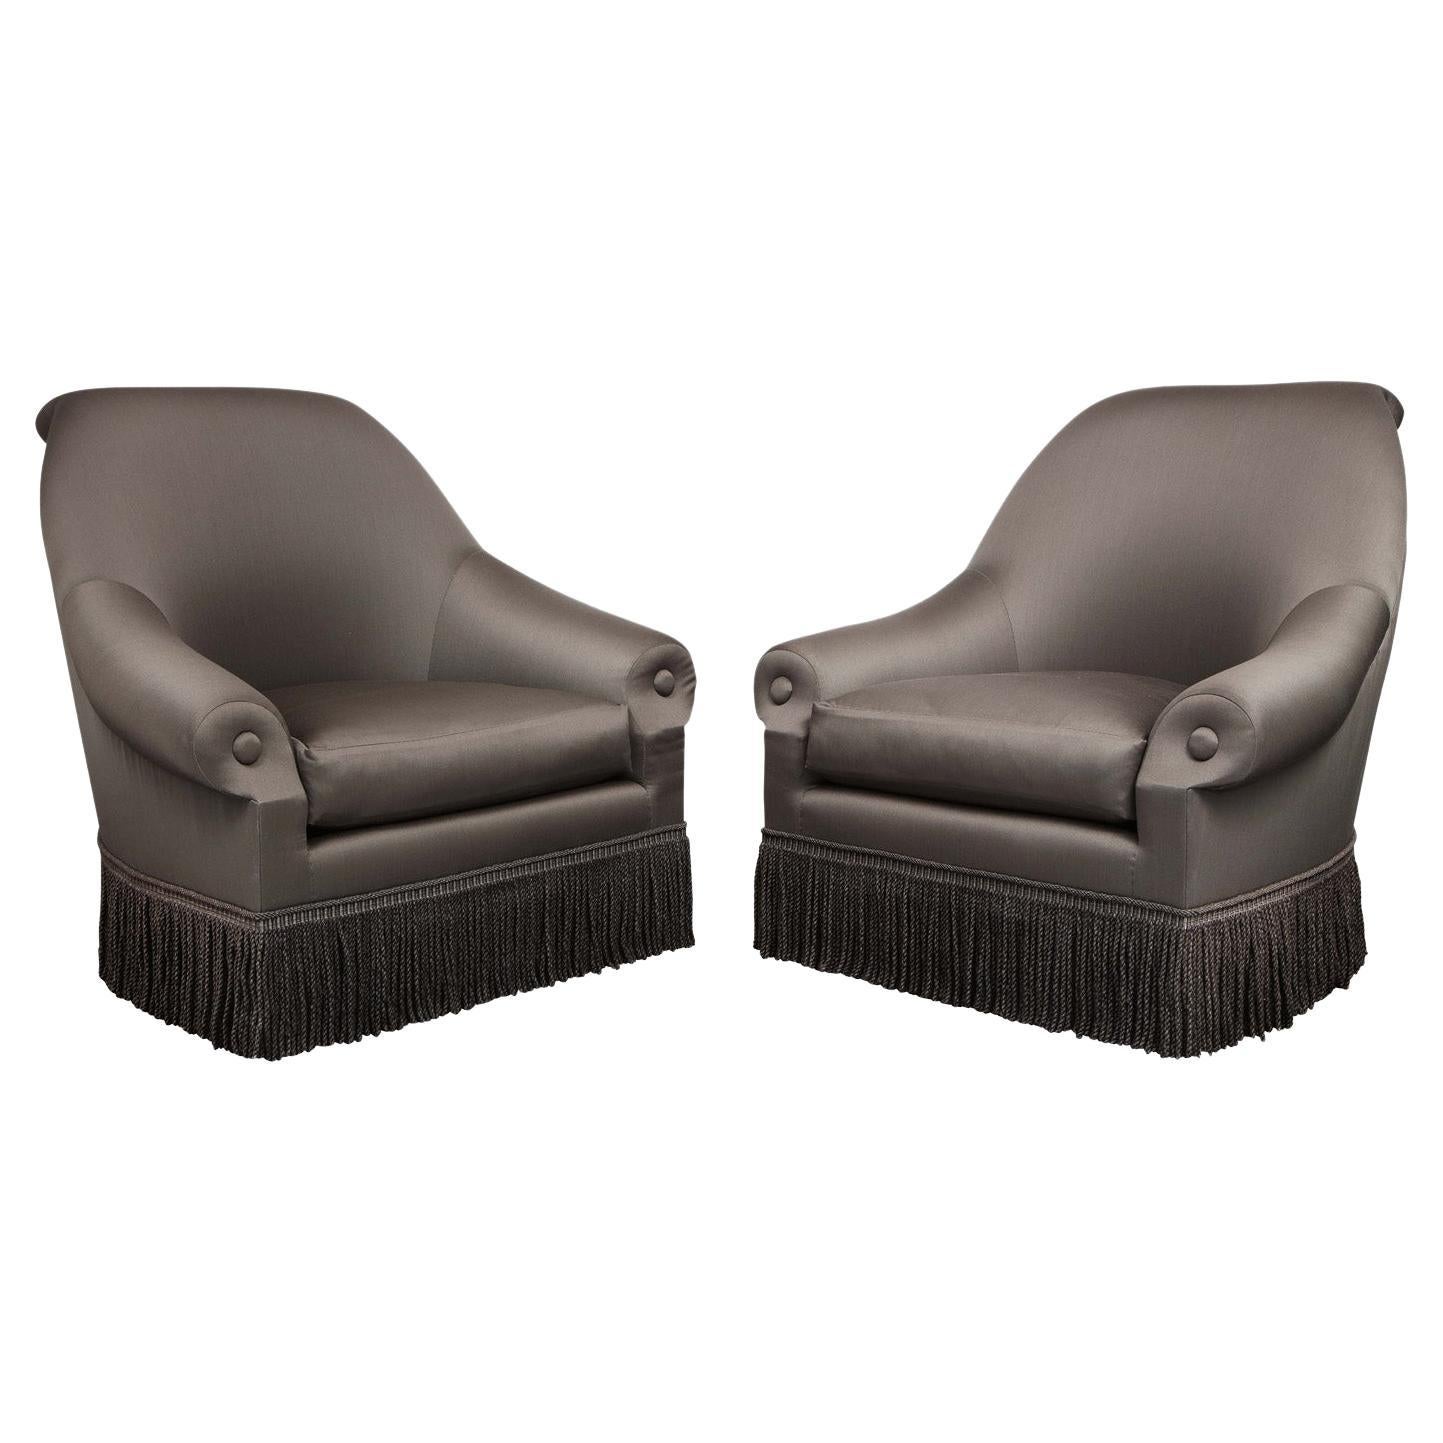 Thad Hayes Pair of Custom Swivel Lounge Chairs for the Gibson Residence NYC 1998 For Sale